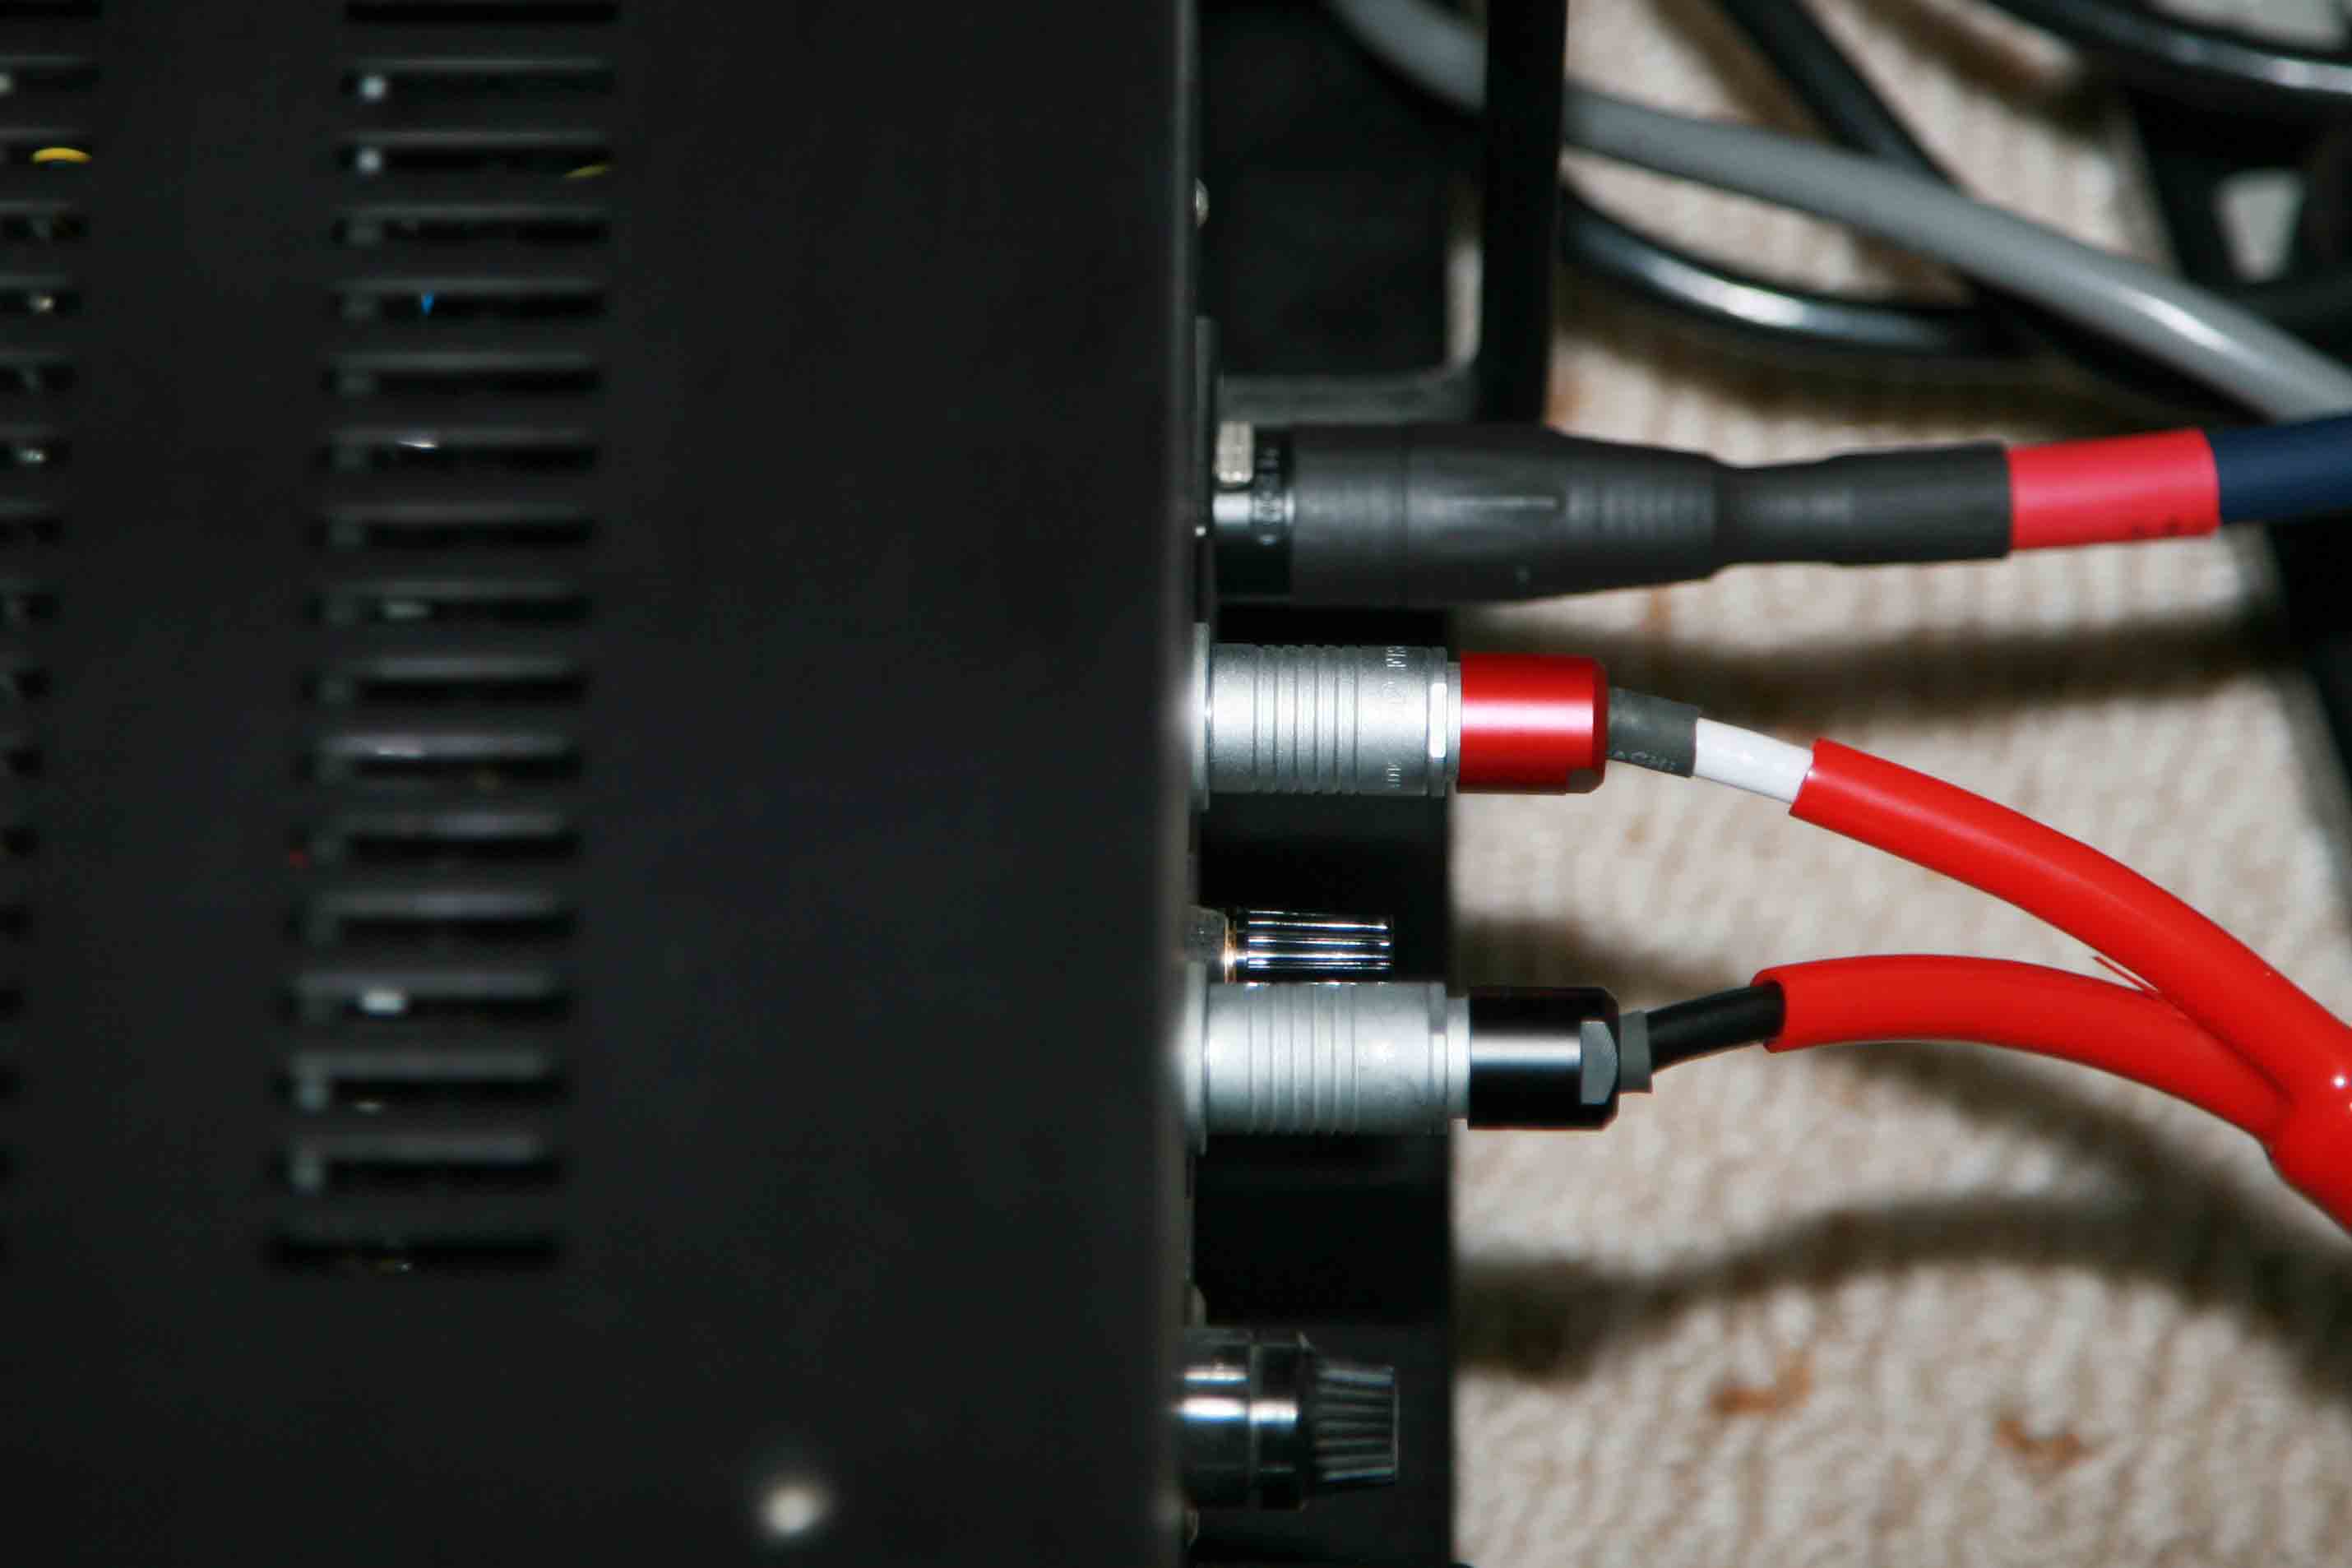 Power_amp_cable.jpg